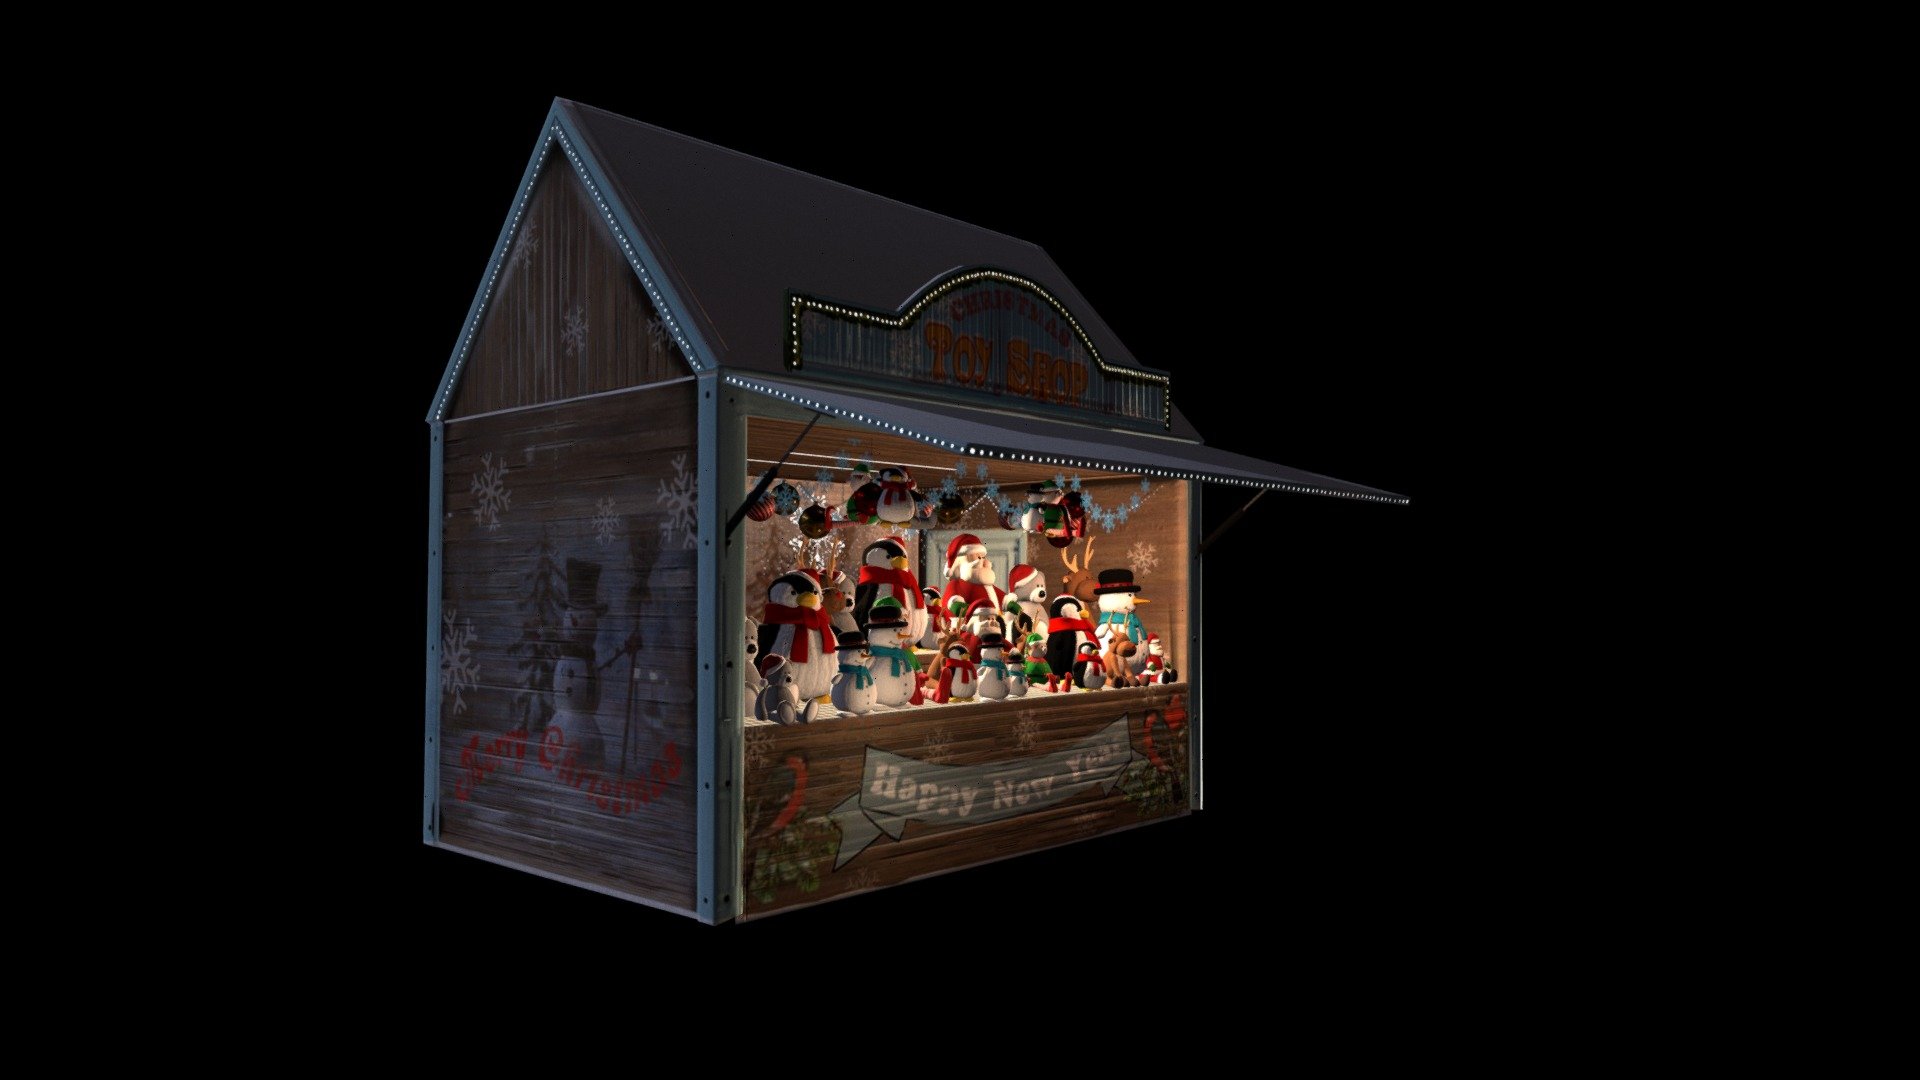 Christmas Market Bakery Chalet- is one of the 6 Chalets of the asset. Almost all models have Diffuse, Normal, Gloss and Specular maps. Some models as chalet itself and Xmas lights have also Emission maps and transperency maps. All models are made in OBJ, FBX and 3dsMax formats. This models set will suit for Christmas projects and not only.
Demo Video:https://www.youtube.com/watch?v=f-ZwfqrEijE - Christmas Market Toys Chalet - Buy Royalty Free 3D model by Vaarg 3d model